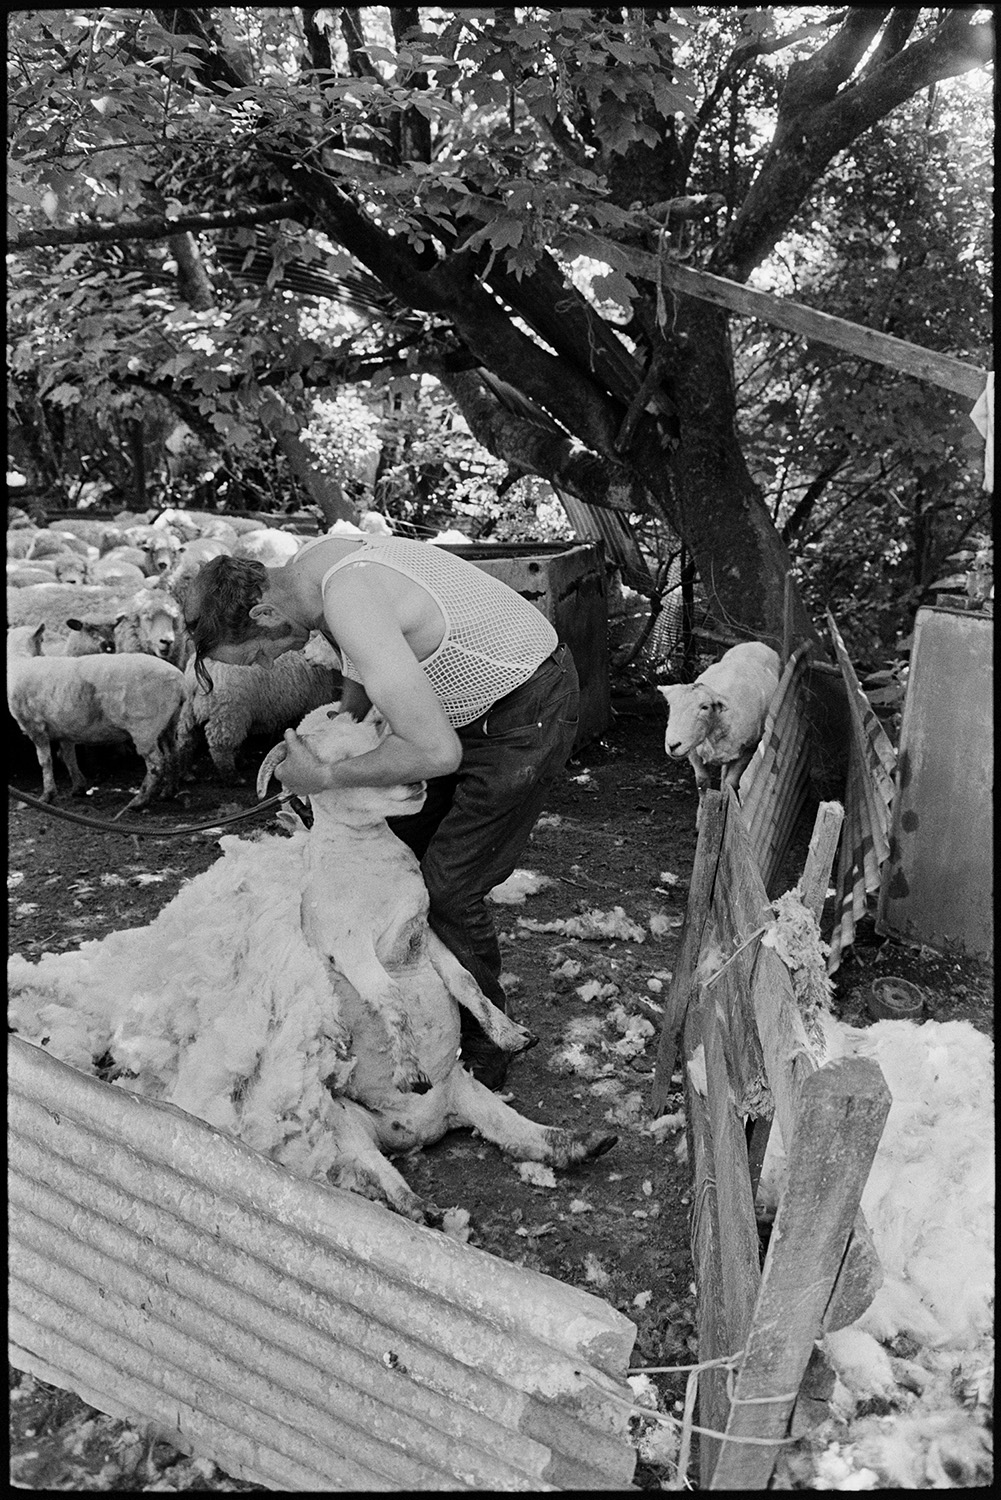 Farmer shearing sheep under tree. Woman farmer bundling up fleeces.
[A man shearing sheep in a corrugated iron pen under trees at Cuppers Piece, Beaford. He is wearing a string vest.]